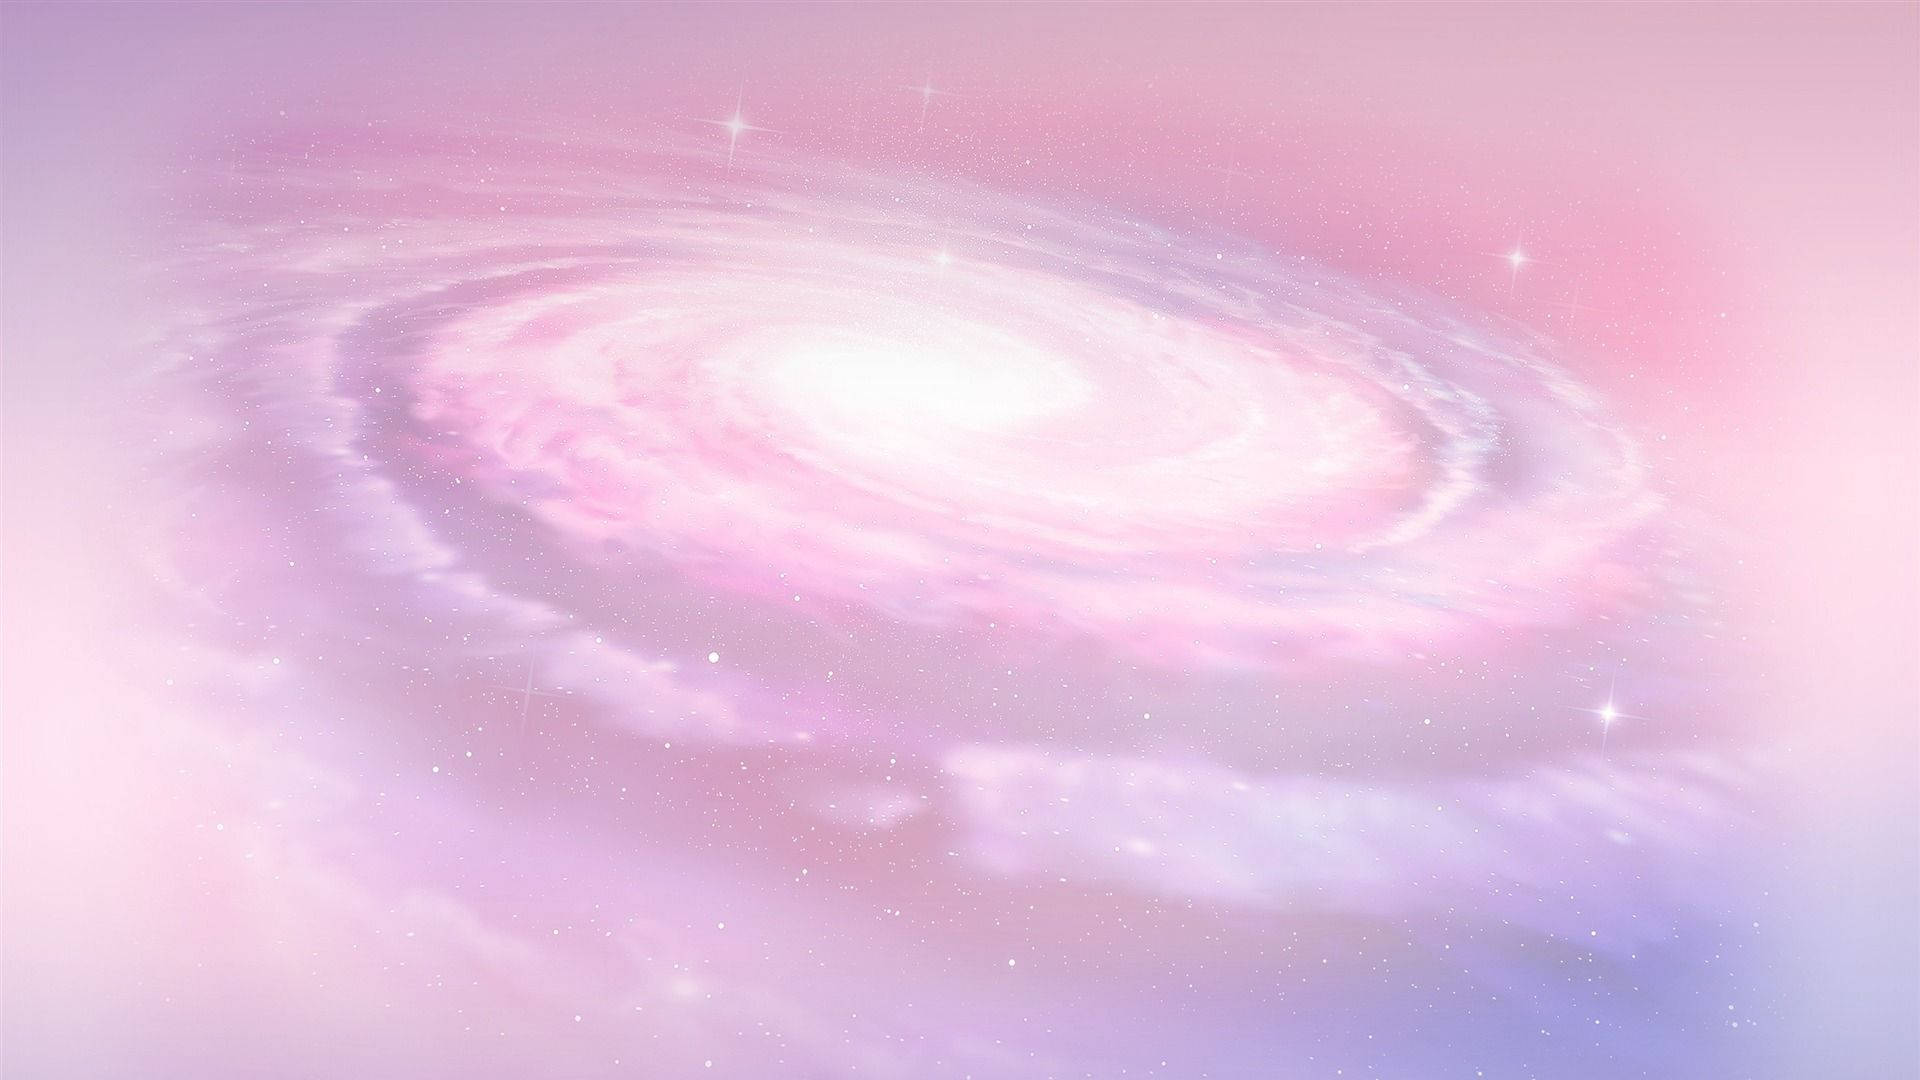 Cute Galaxy Pictures